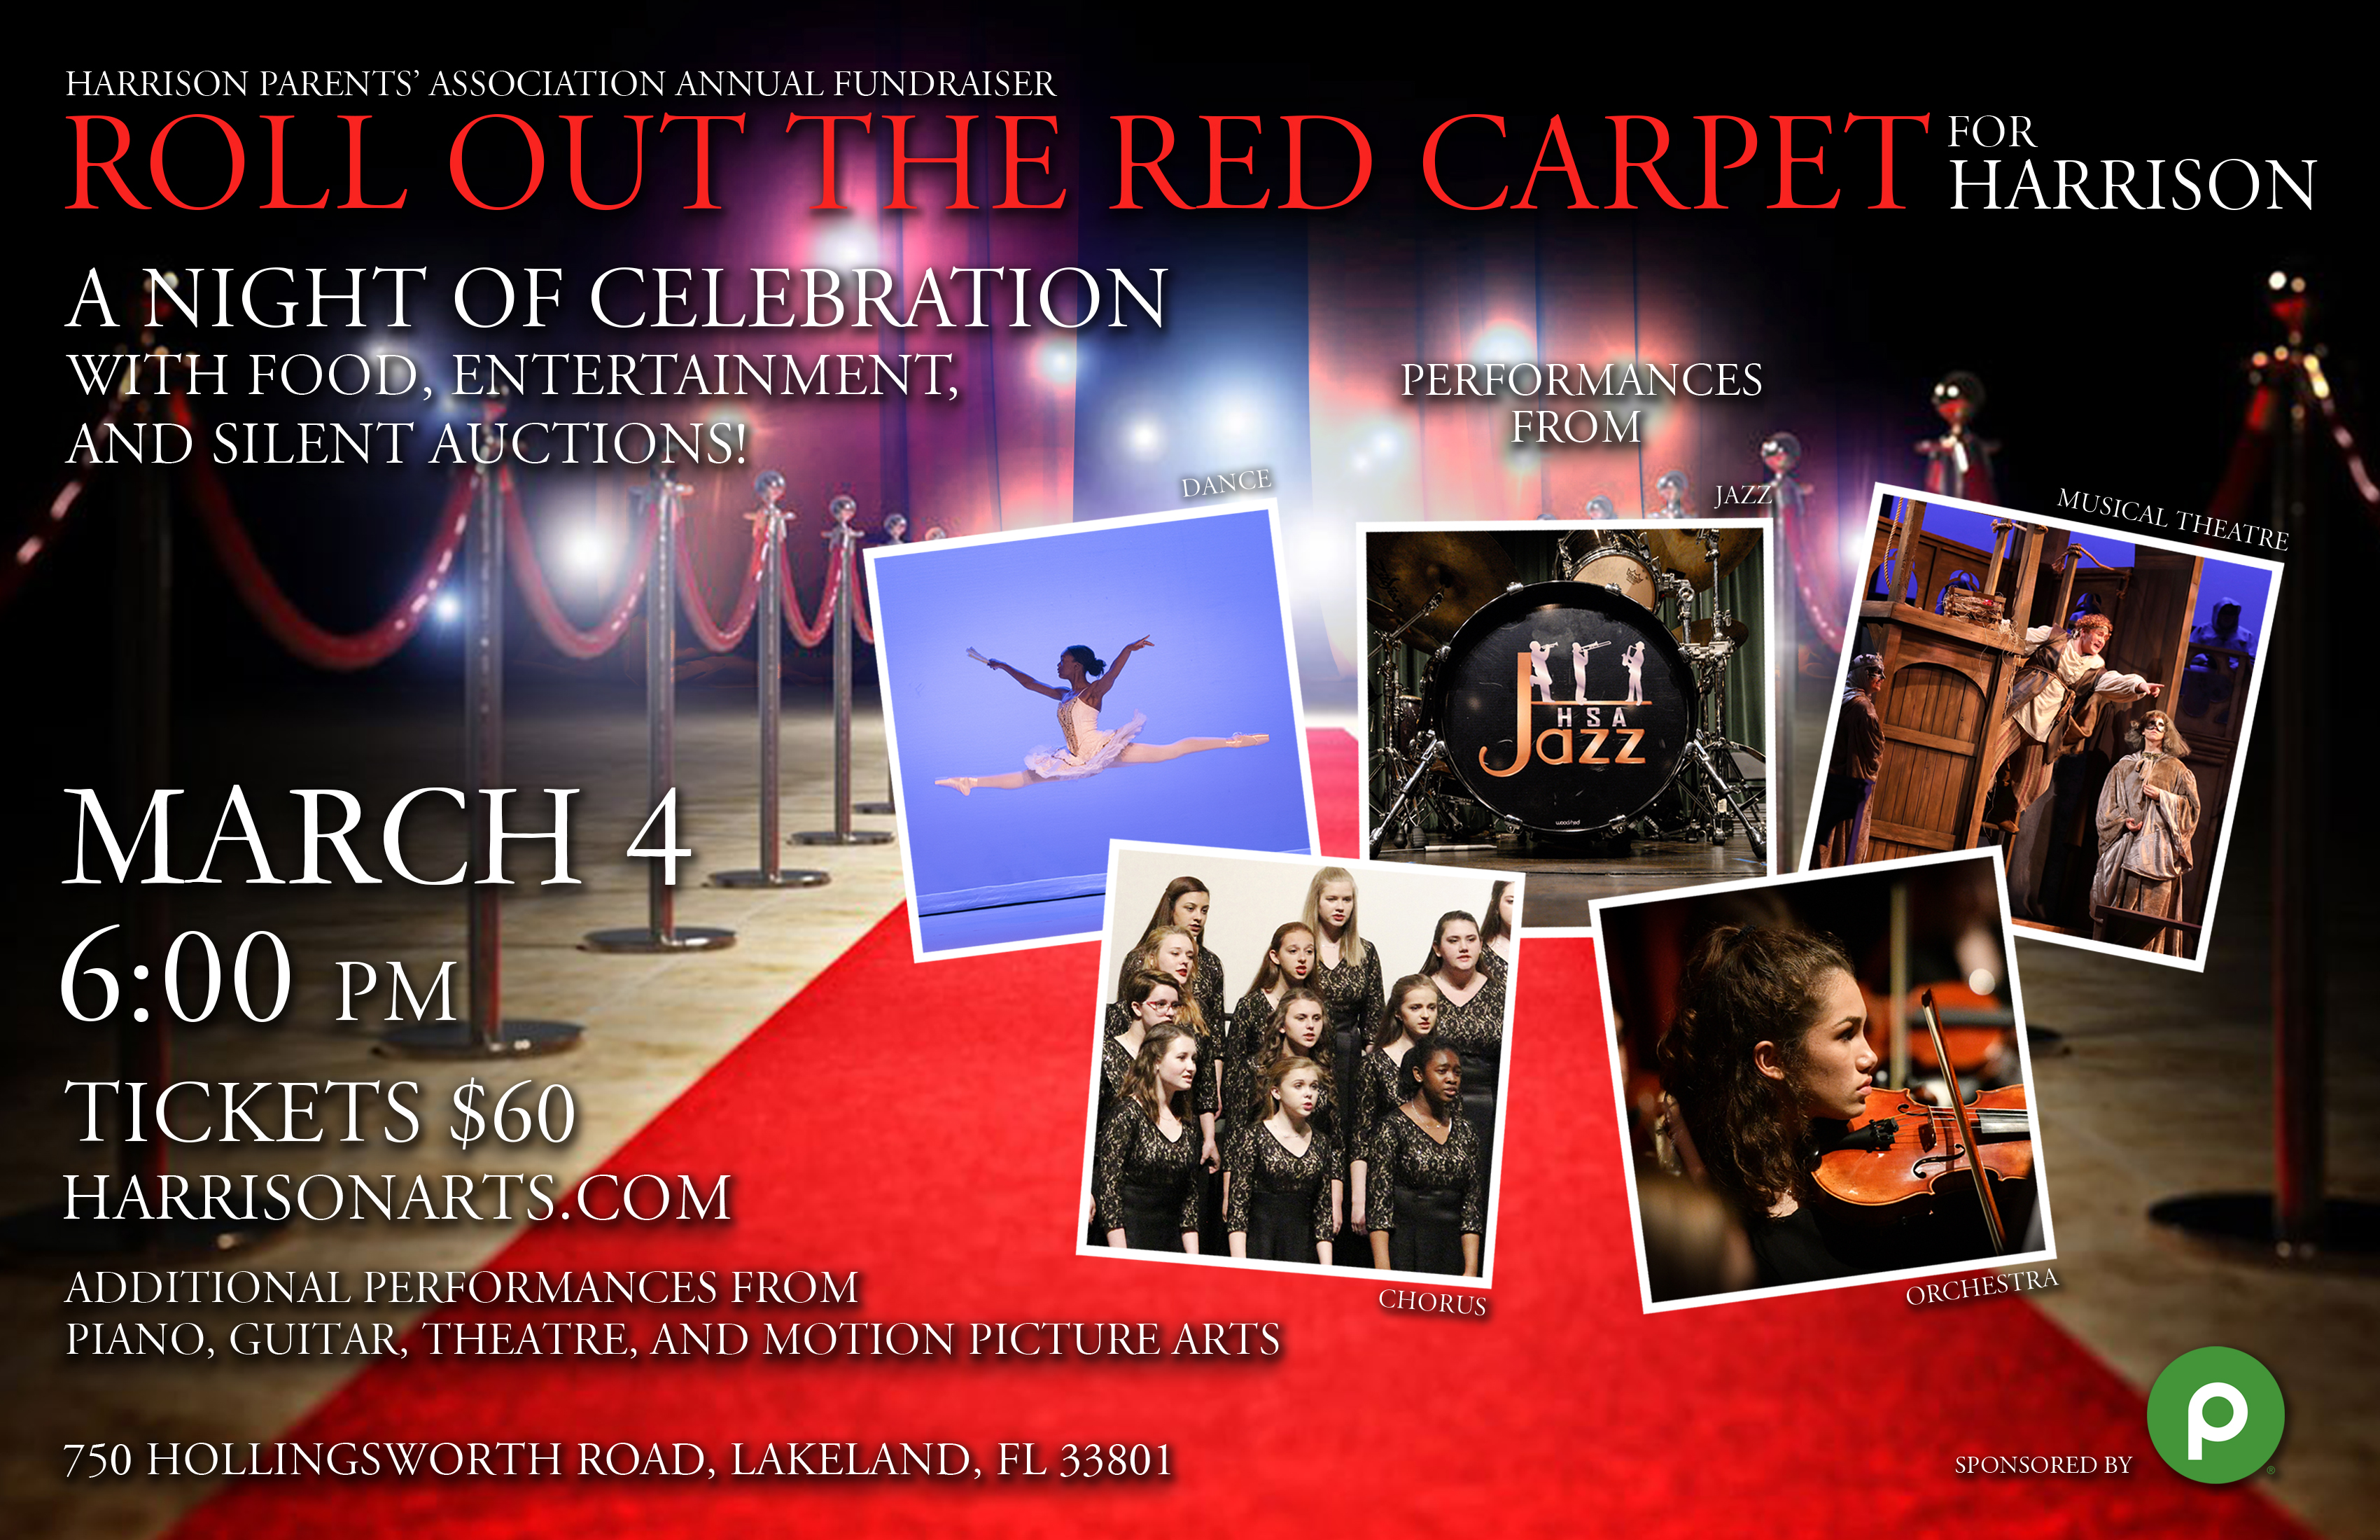 Harrison School for the Arts is proud to present Roll out the Red Carpet for Harrison – A Night of Celebration with Food, Entertainment and Silent Auction. This annual fundraising event will take place on Saturday, March 4, 2023 at 6:00 p.m. Save $10 per ticket on early bird purchases before February 3, 2023. Tickets are available at www.harrisonarts.com/redcarpet. You don’t have to attend the performance to participate in the auction. Sponsored by Publix Supermarkets.